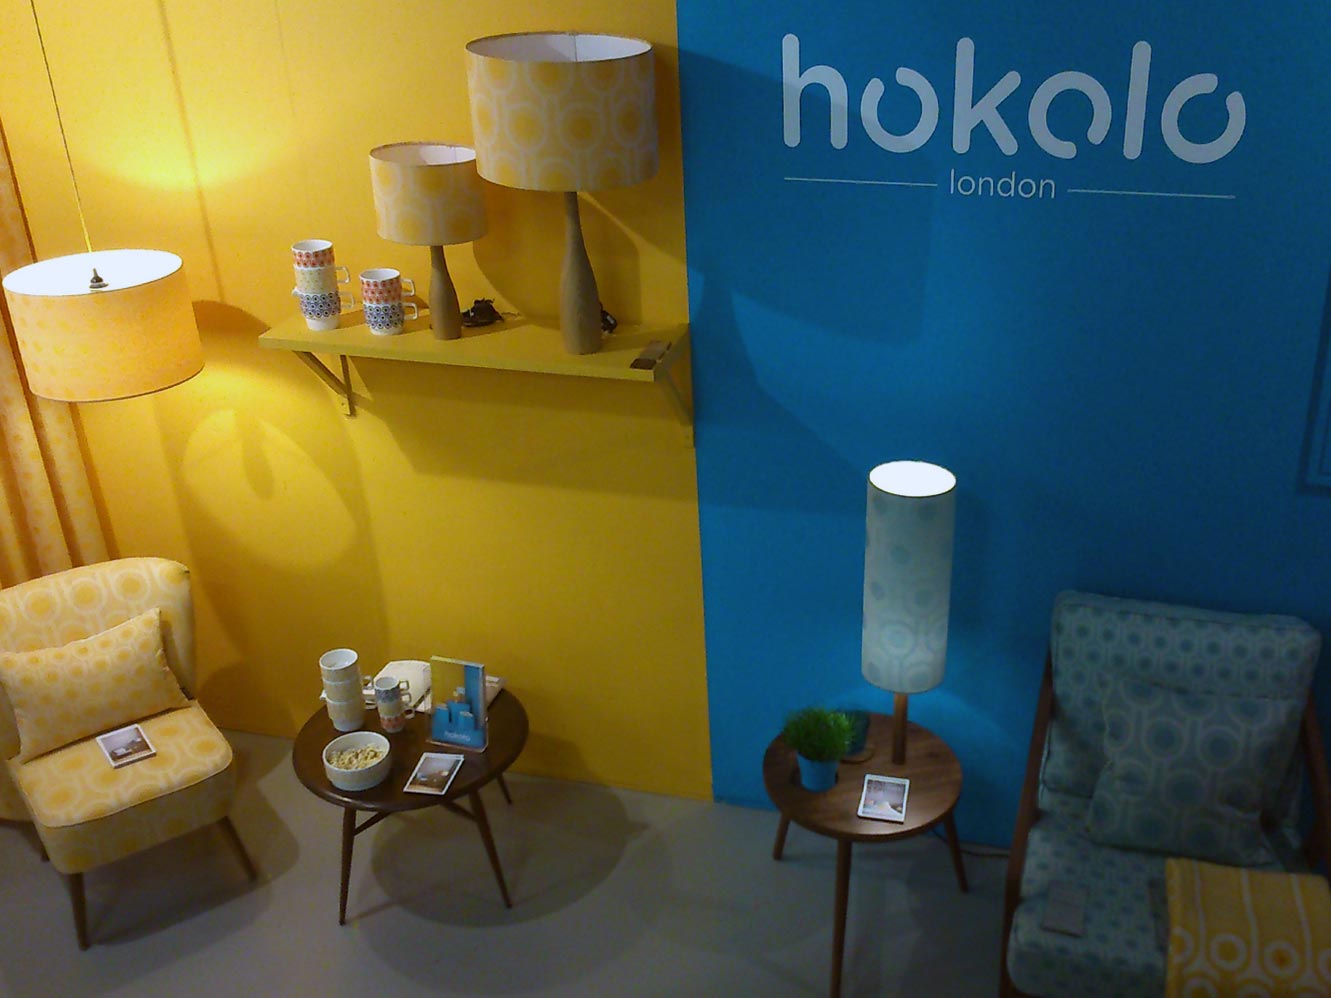  You couldn't walk past  Hokolo  without noticing their energetic stand and awesome patterned wools. 